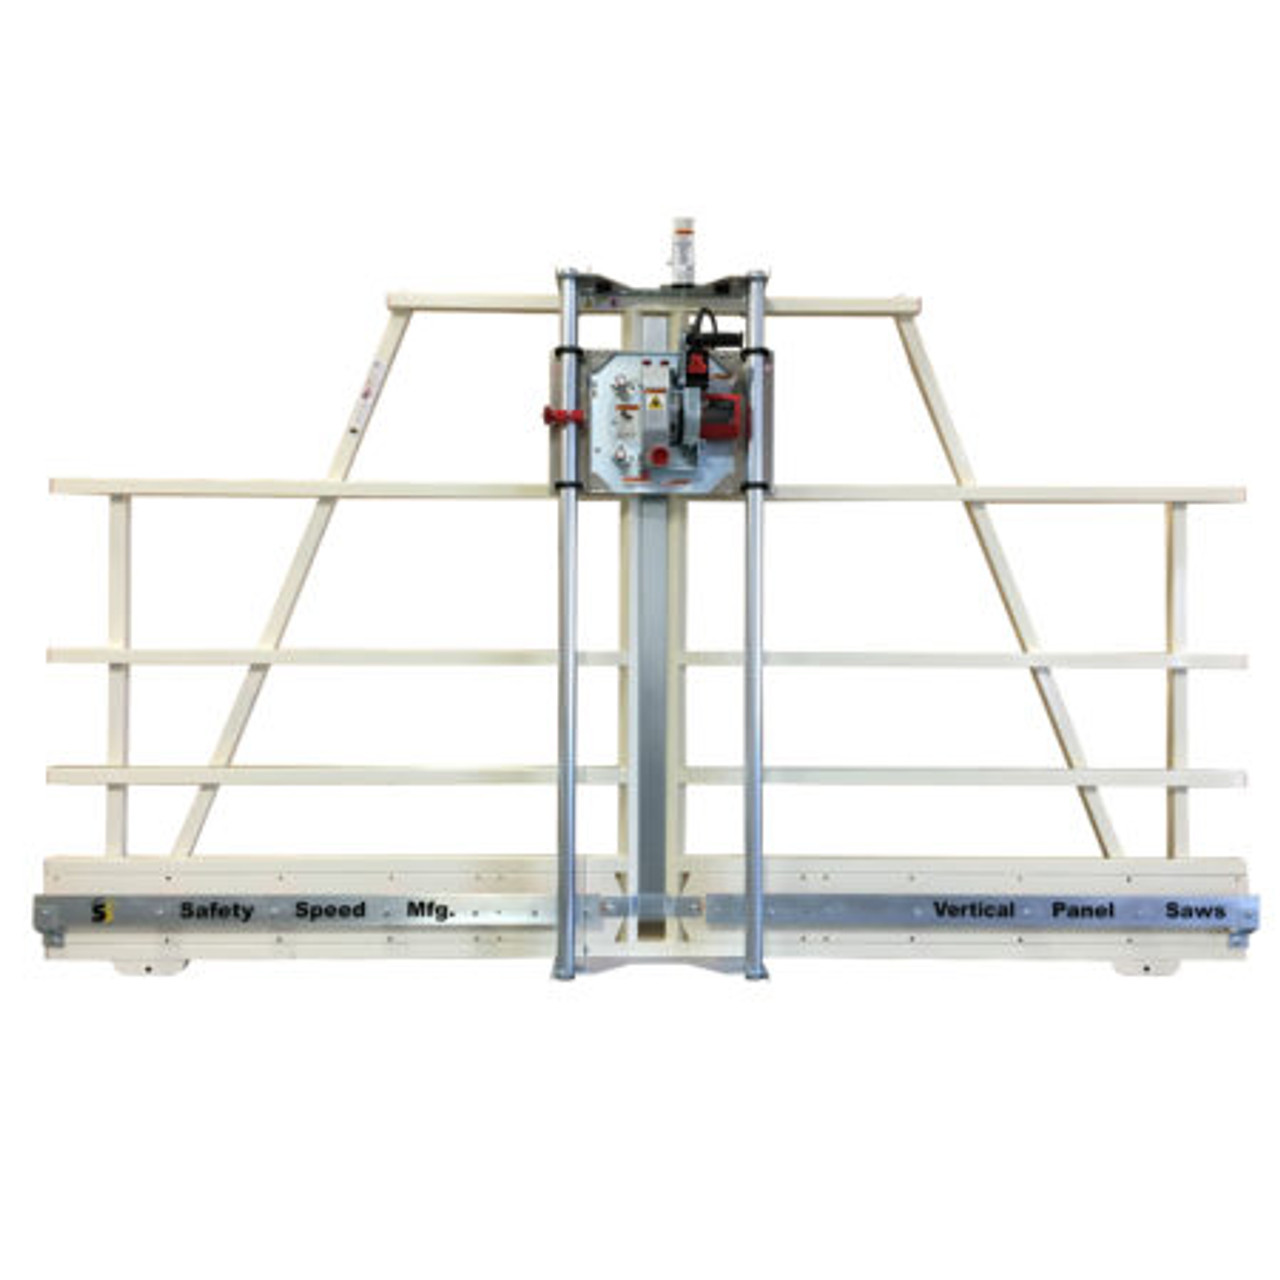 H4 Panel Saw With 50″ Maximum Cutting Height with 7.5 Amp, 220 Volts, 3.25 HP Motor